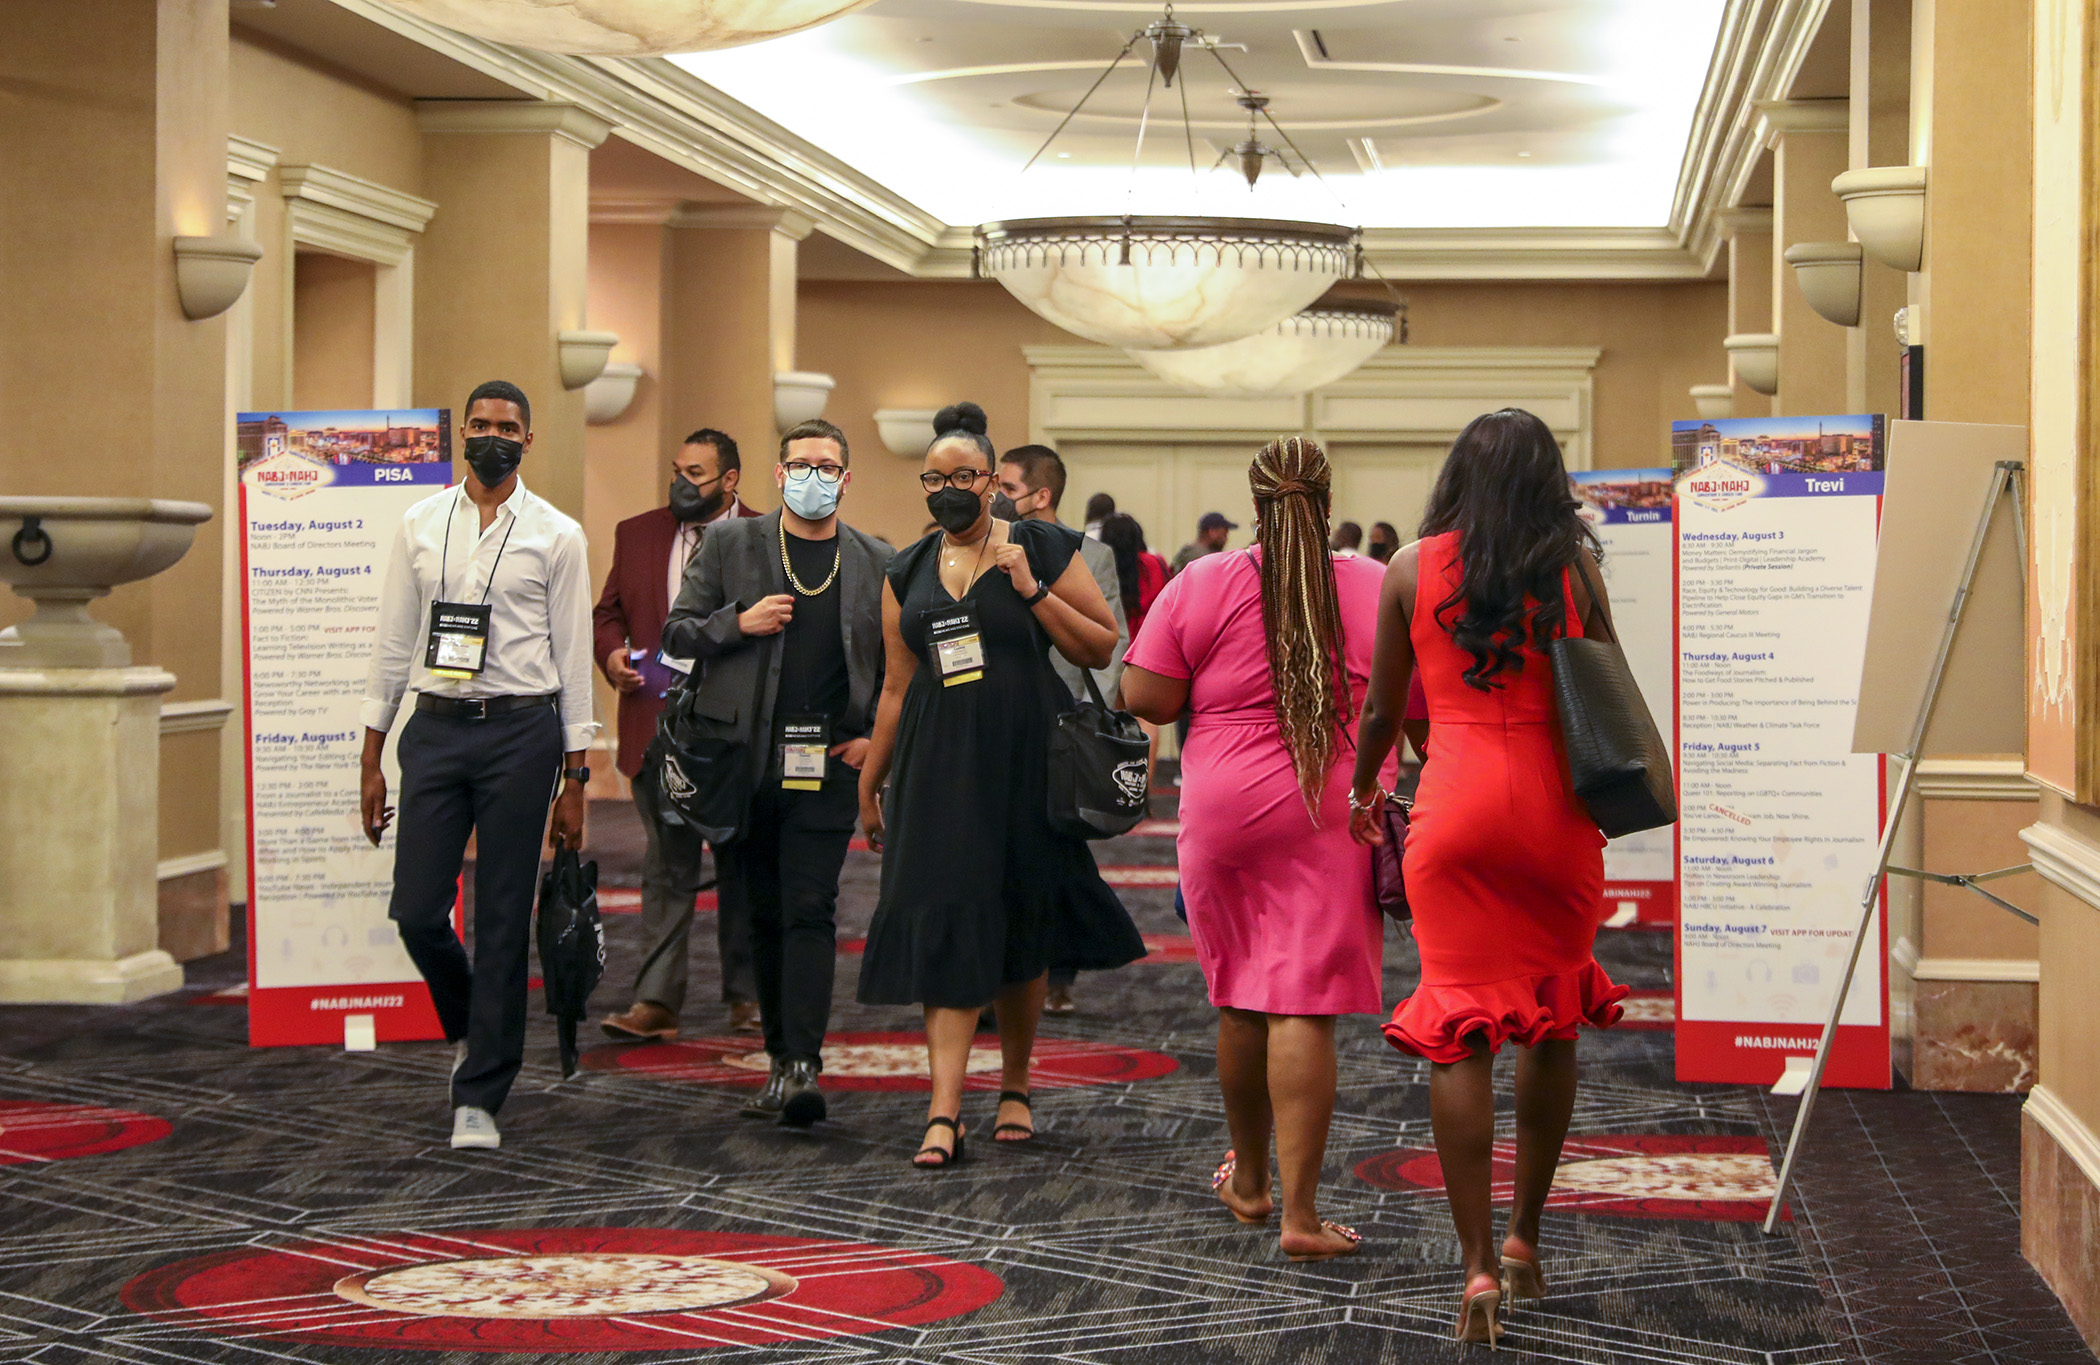 Attendees walk through the halls on their way to sessions on the first day of the NABJ/NAHJ 2022 Convention and Job Fair in Las Vegas, Nev., on Wednesday, August 03, 2022.